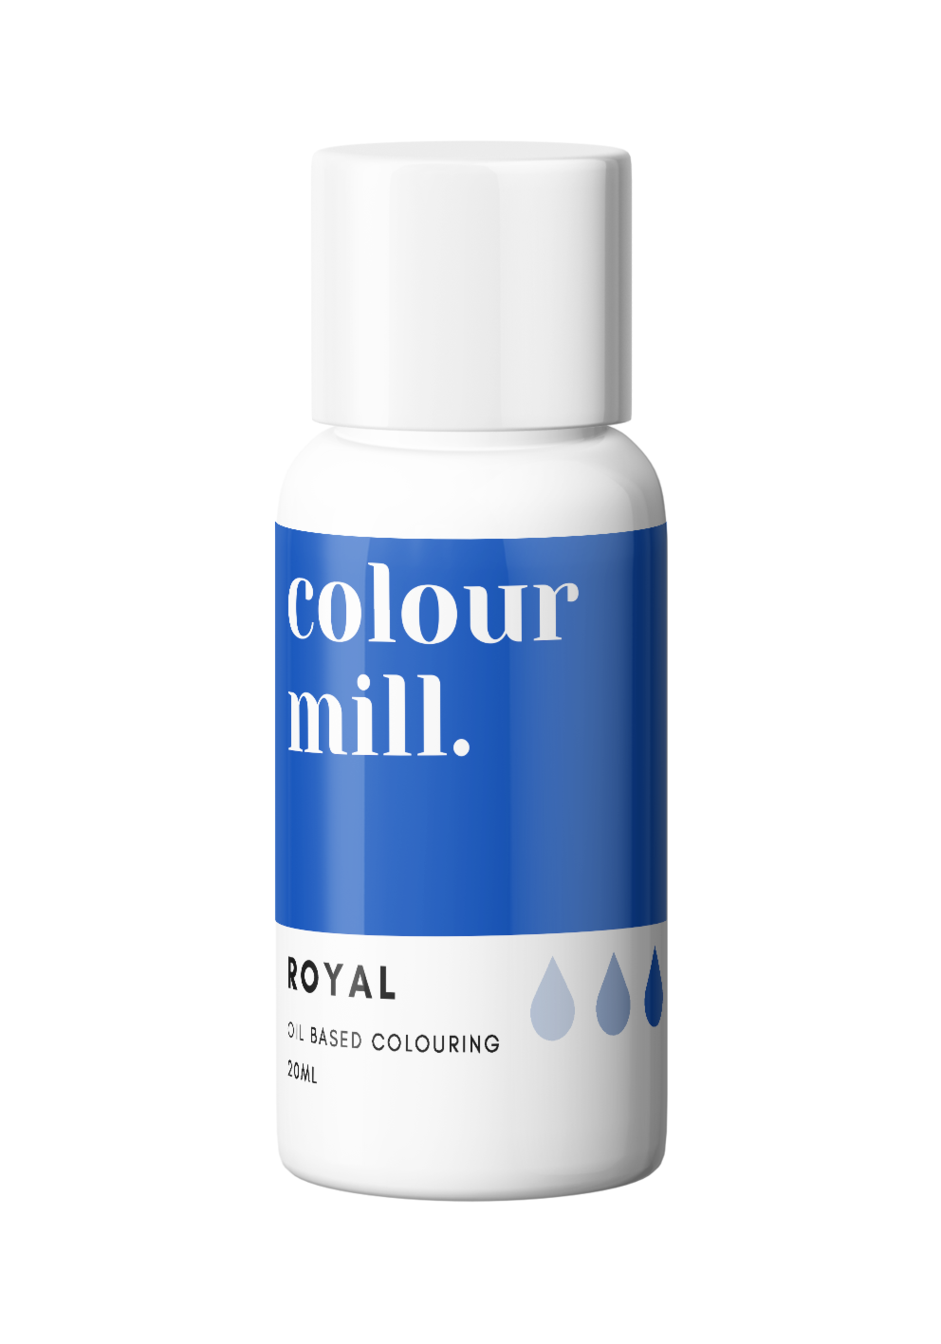 Royal Blue, 20ml, Colour Mill Oil Based Colouring